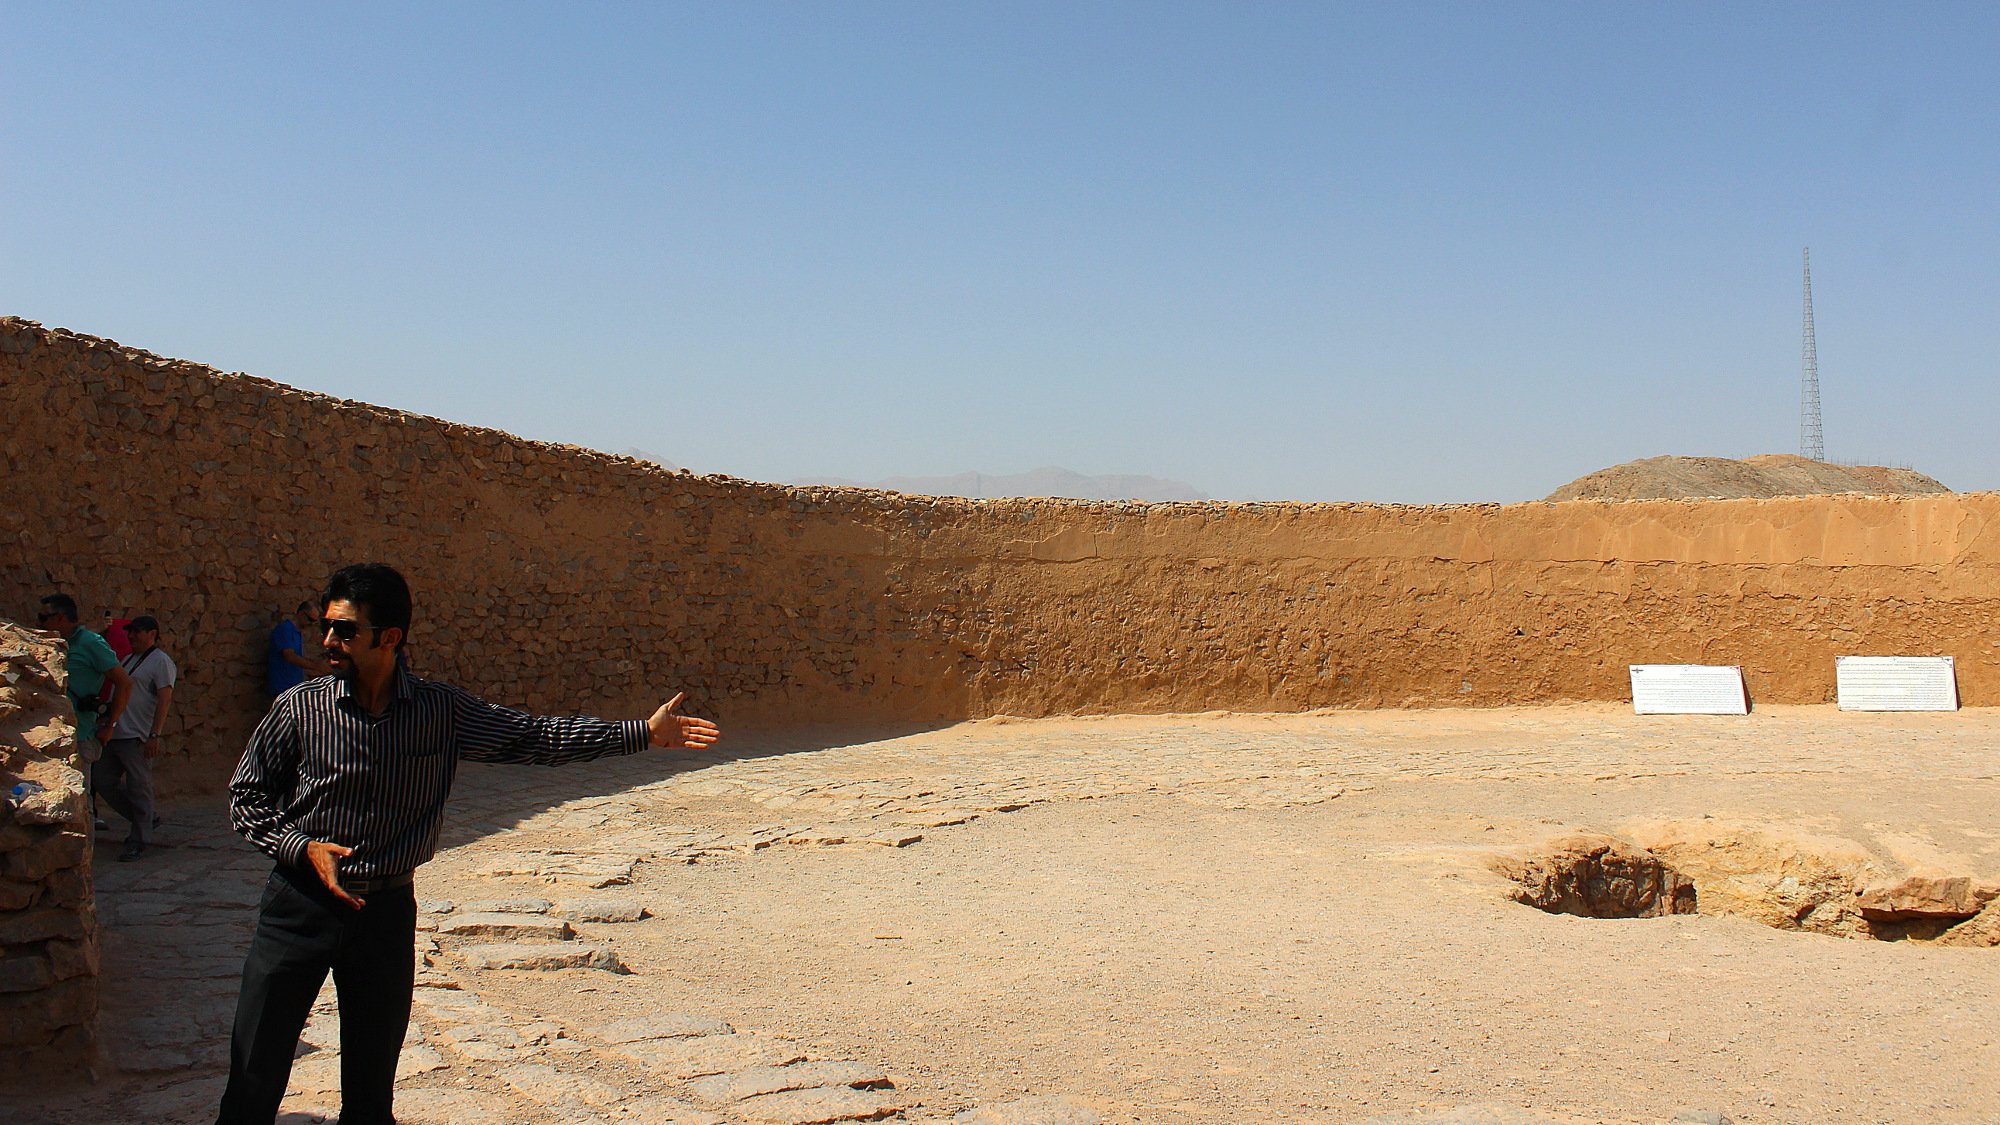 A Zoroastrian Tower of Silence used for burial in Iran.